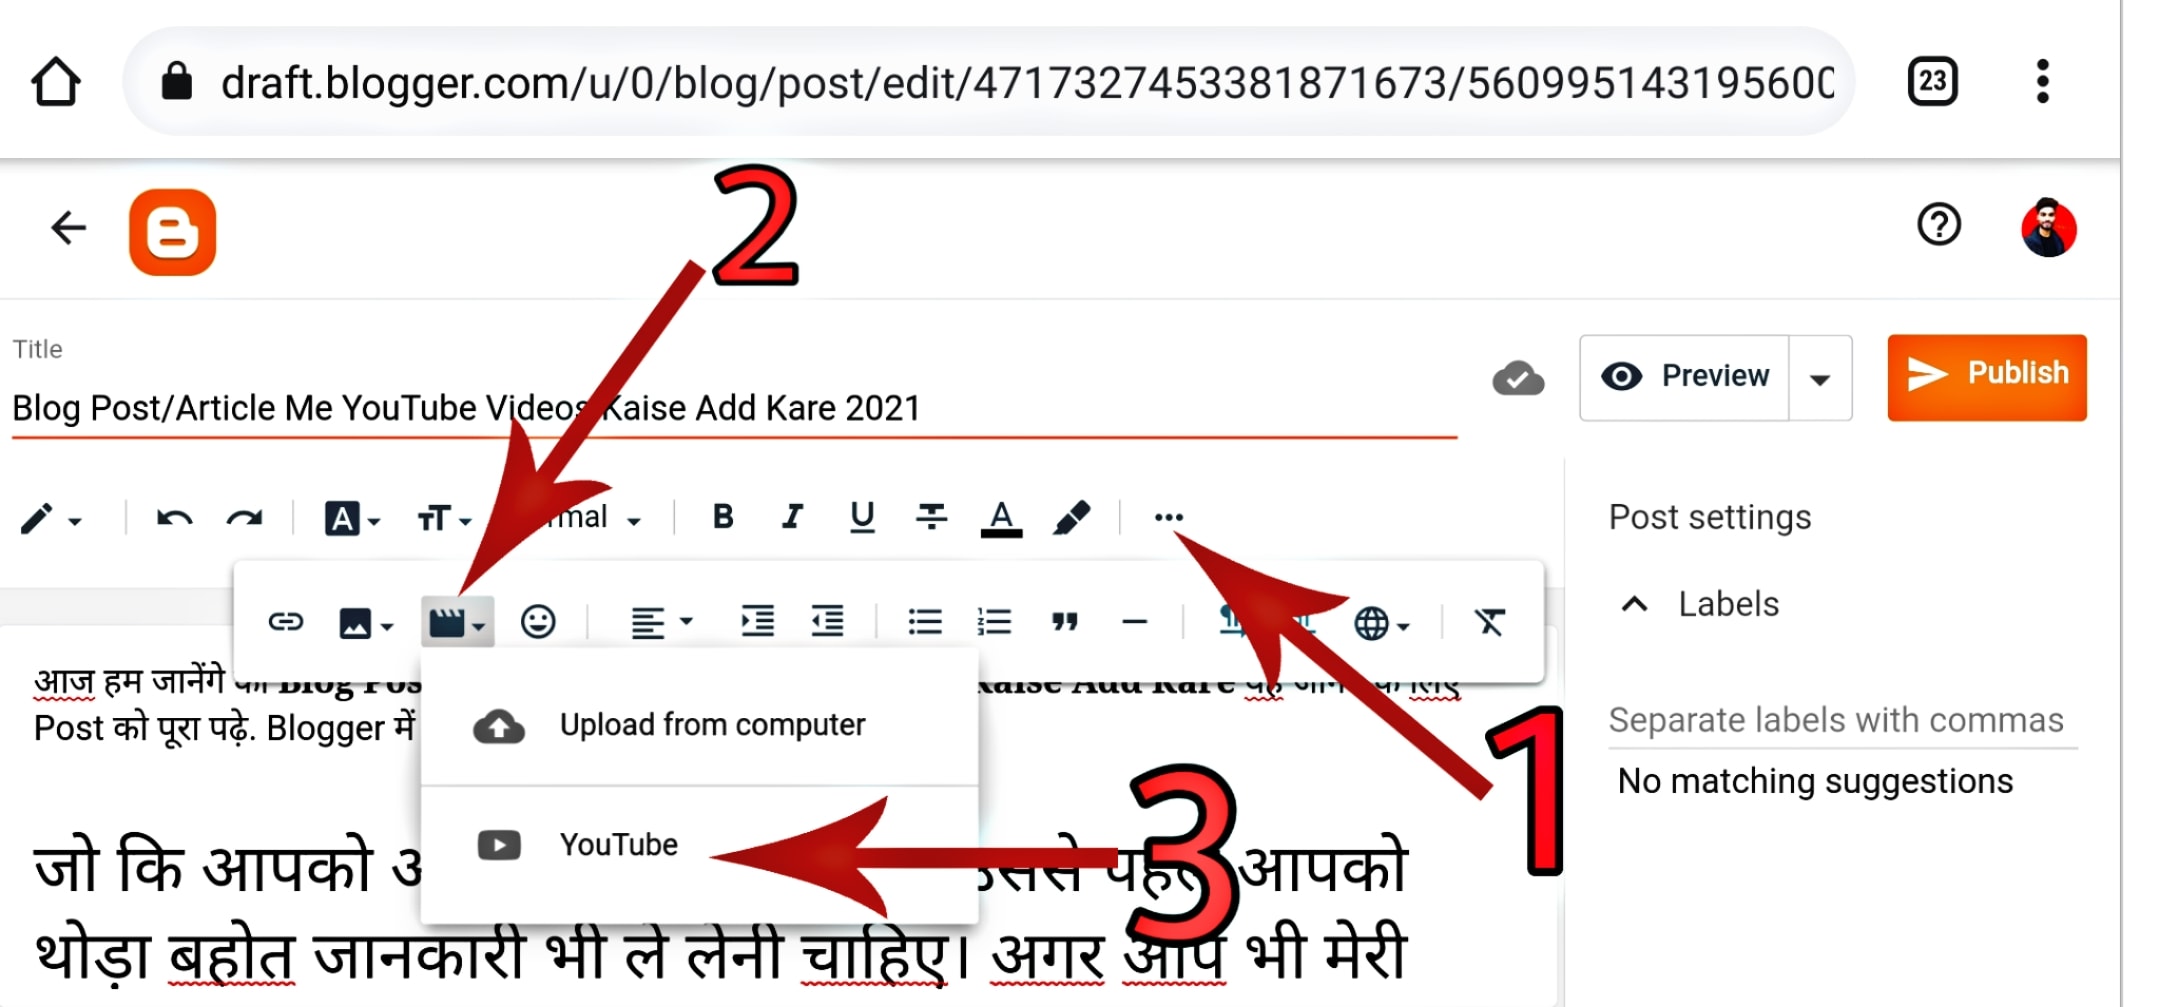 Blog Post/Article Me YouTube Videos Kaise Add Kare 2021